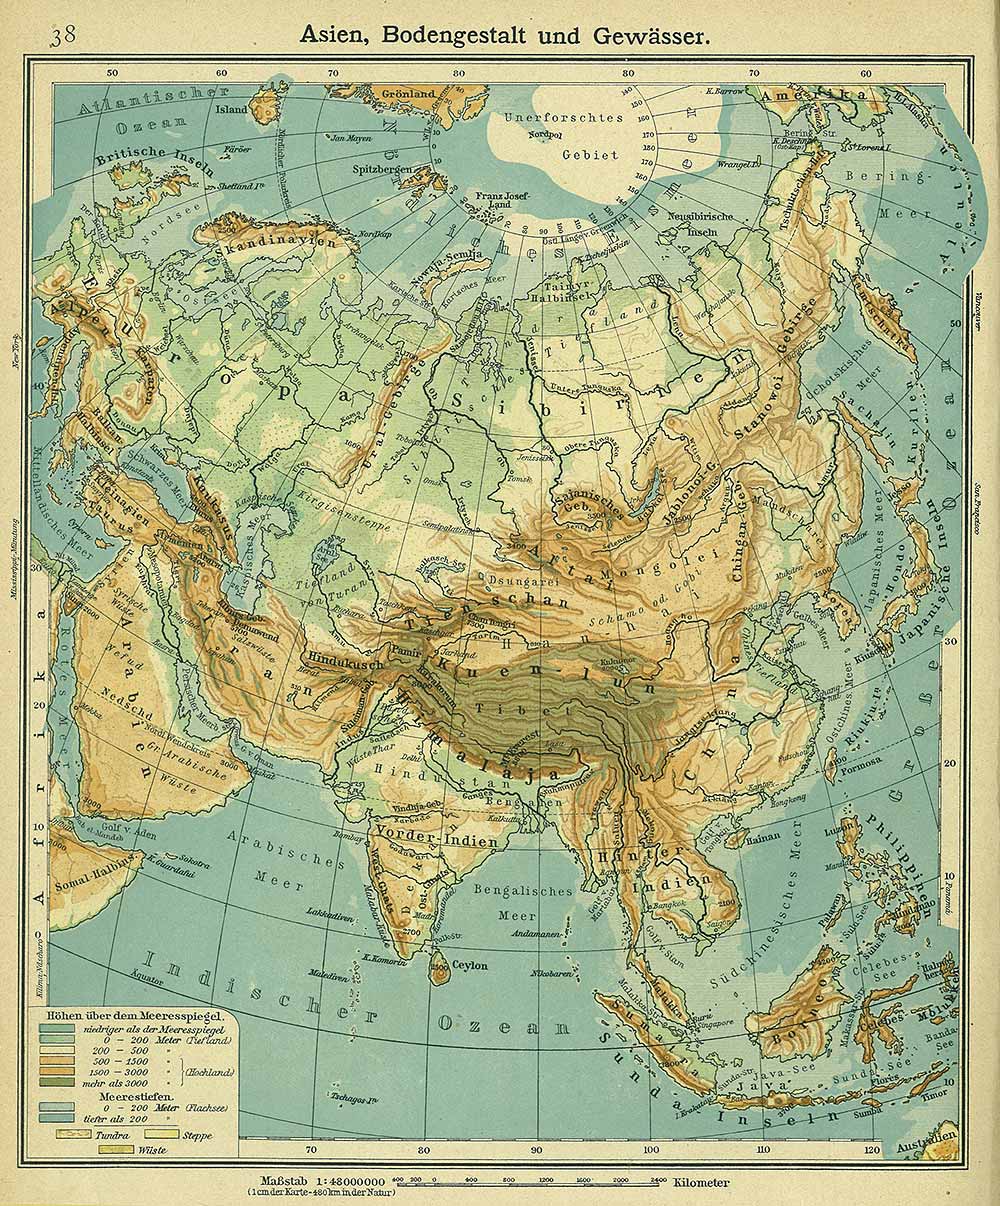 Asia, topography and water areas, Andrees 'Berliner Schul-Atlas', 1916, page 38, published size to print borders 21.86 cm wide by 26.19 cm high.